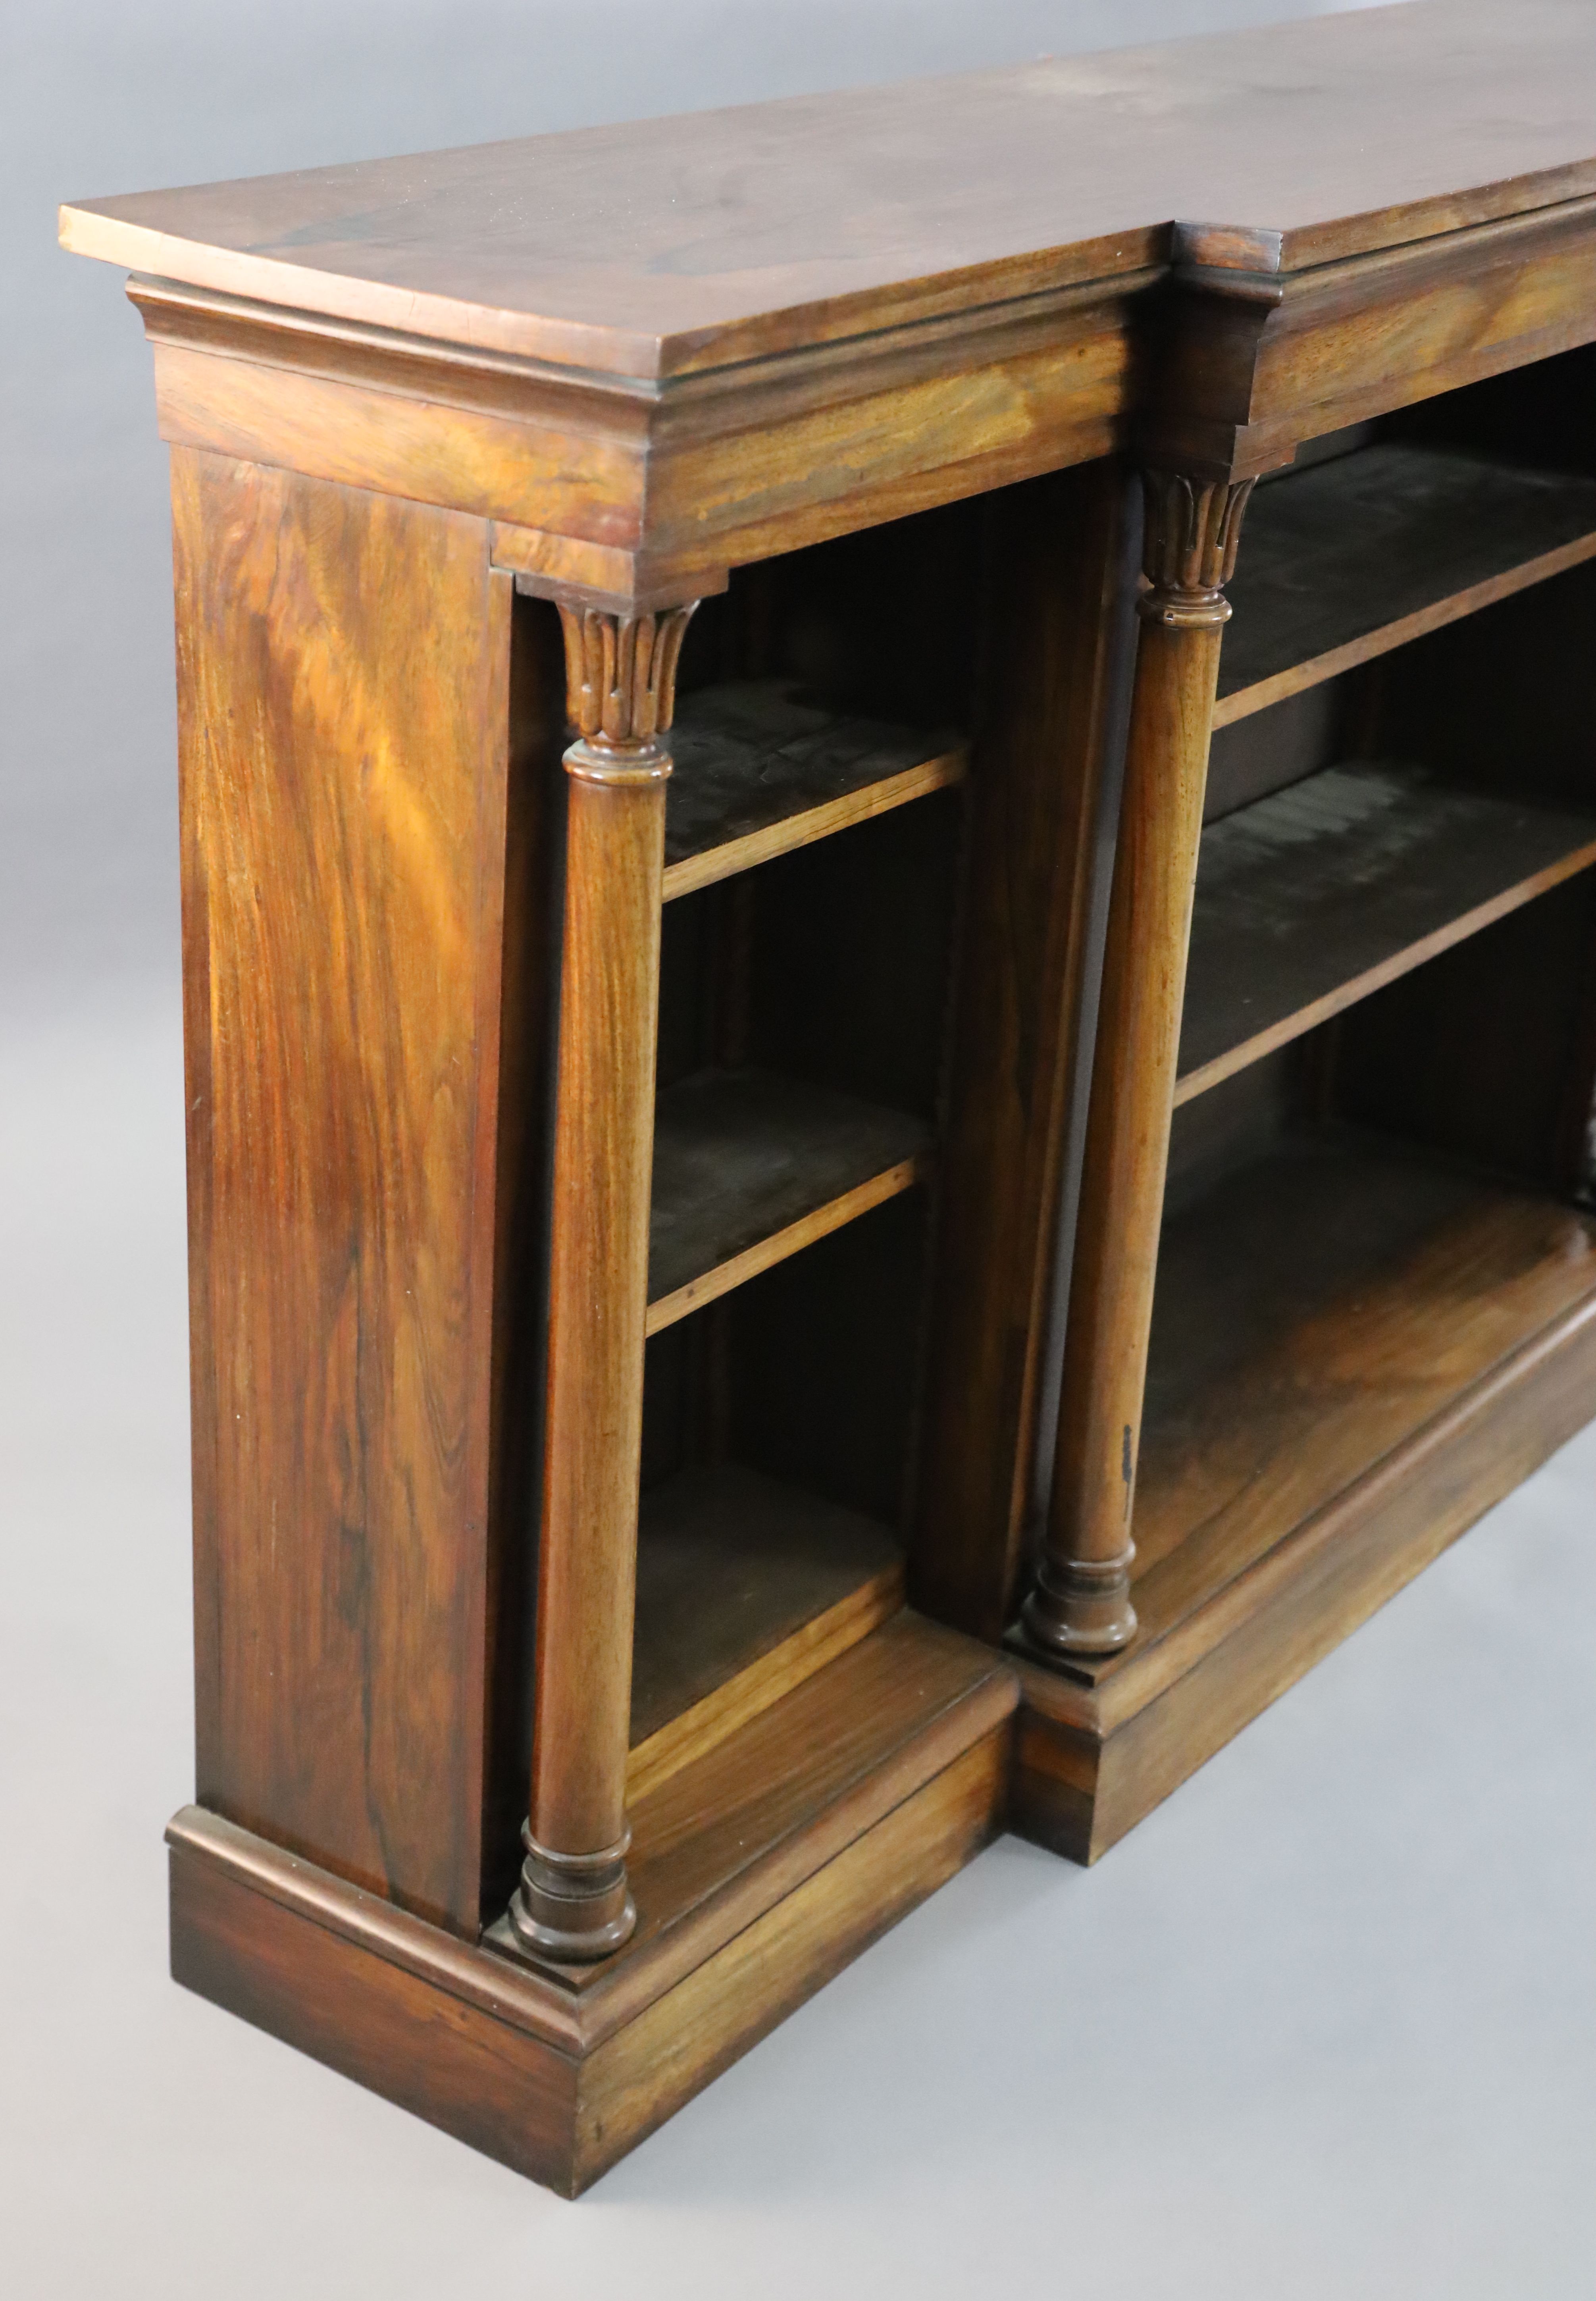 A William IV rosewood dwarf bookcase, W.6ft 6in. D.1ft 5in. H.3ft 6in.